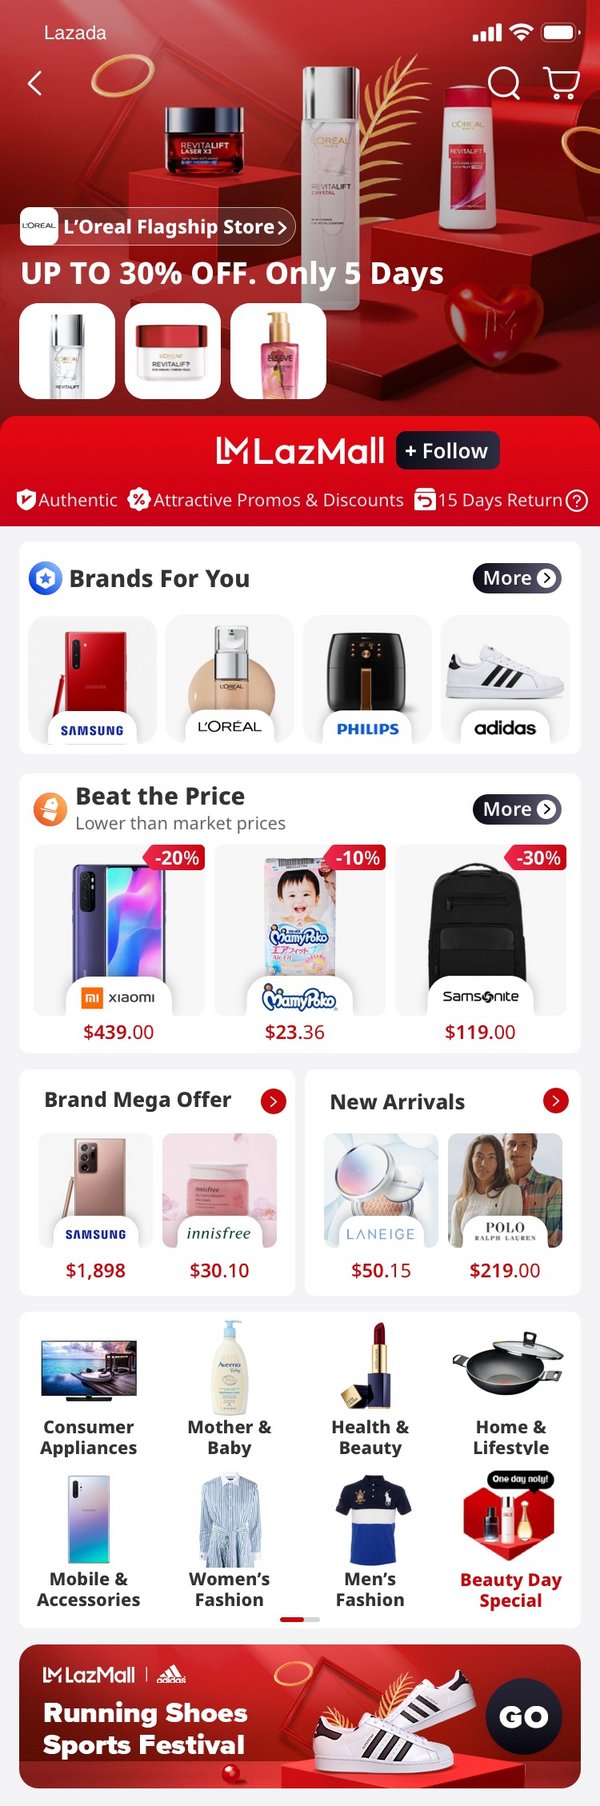 Lazada’s LazMall unveils new features, including a new visual.